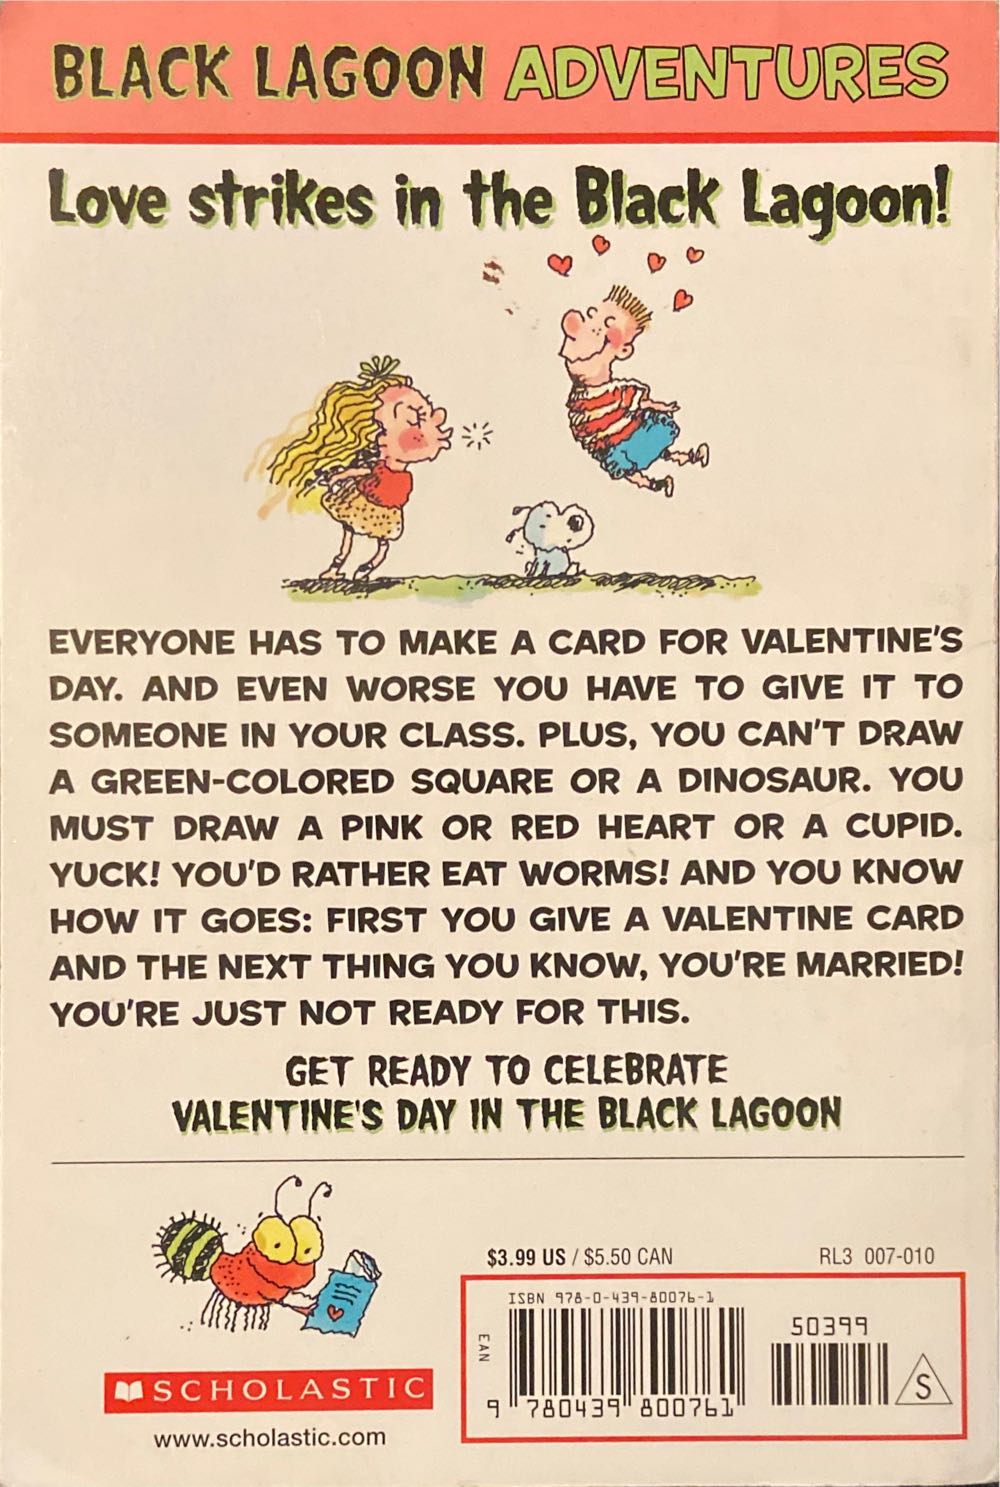 Black Lagoon #8: Valentine’s Day - Mike Thaler (Scholastic Inc. - Paperback) book collectible [Barcode 9780439800761] - Main Image 2